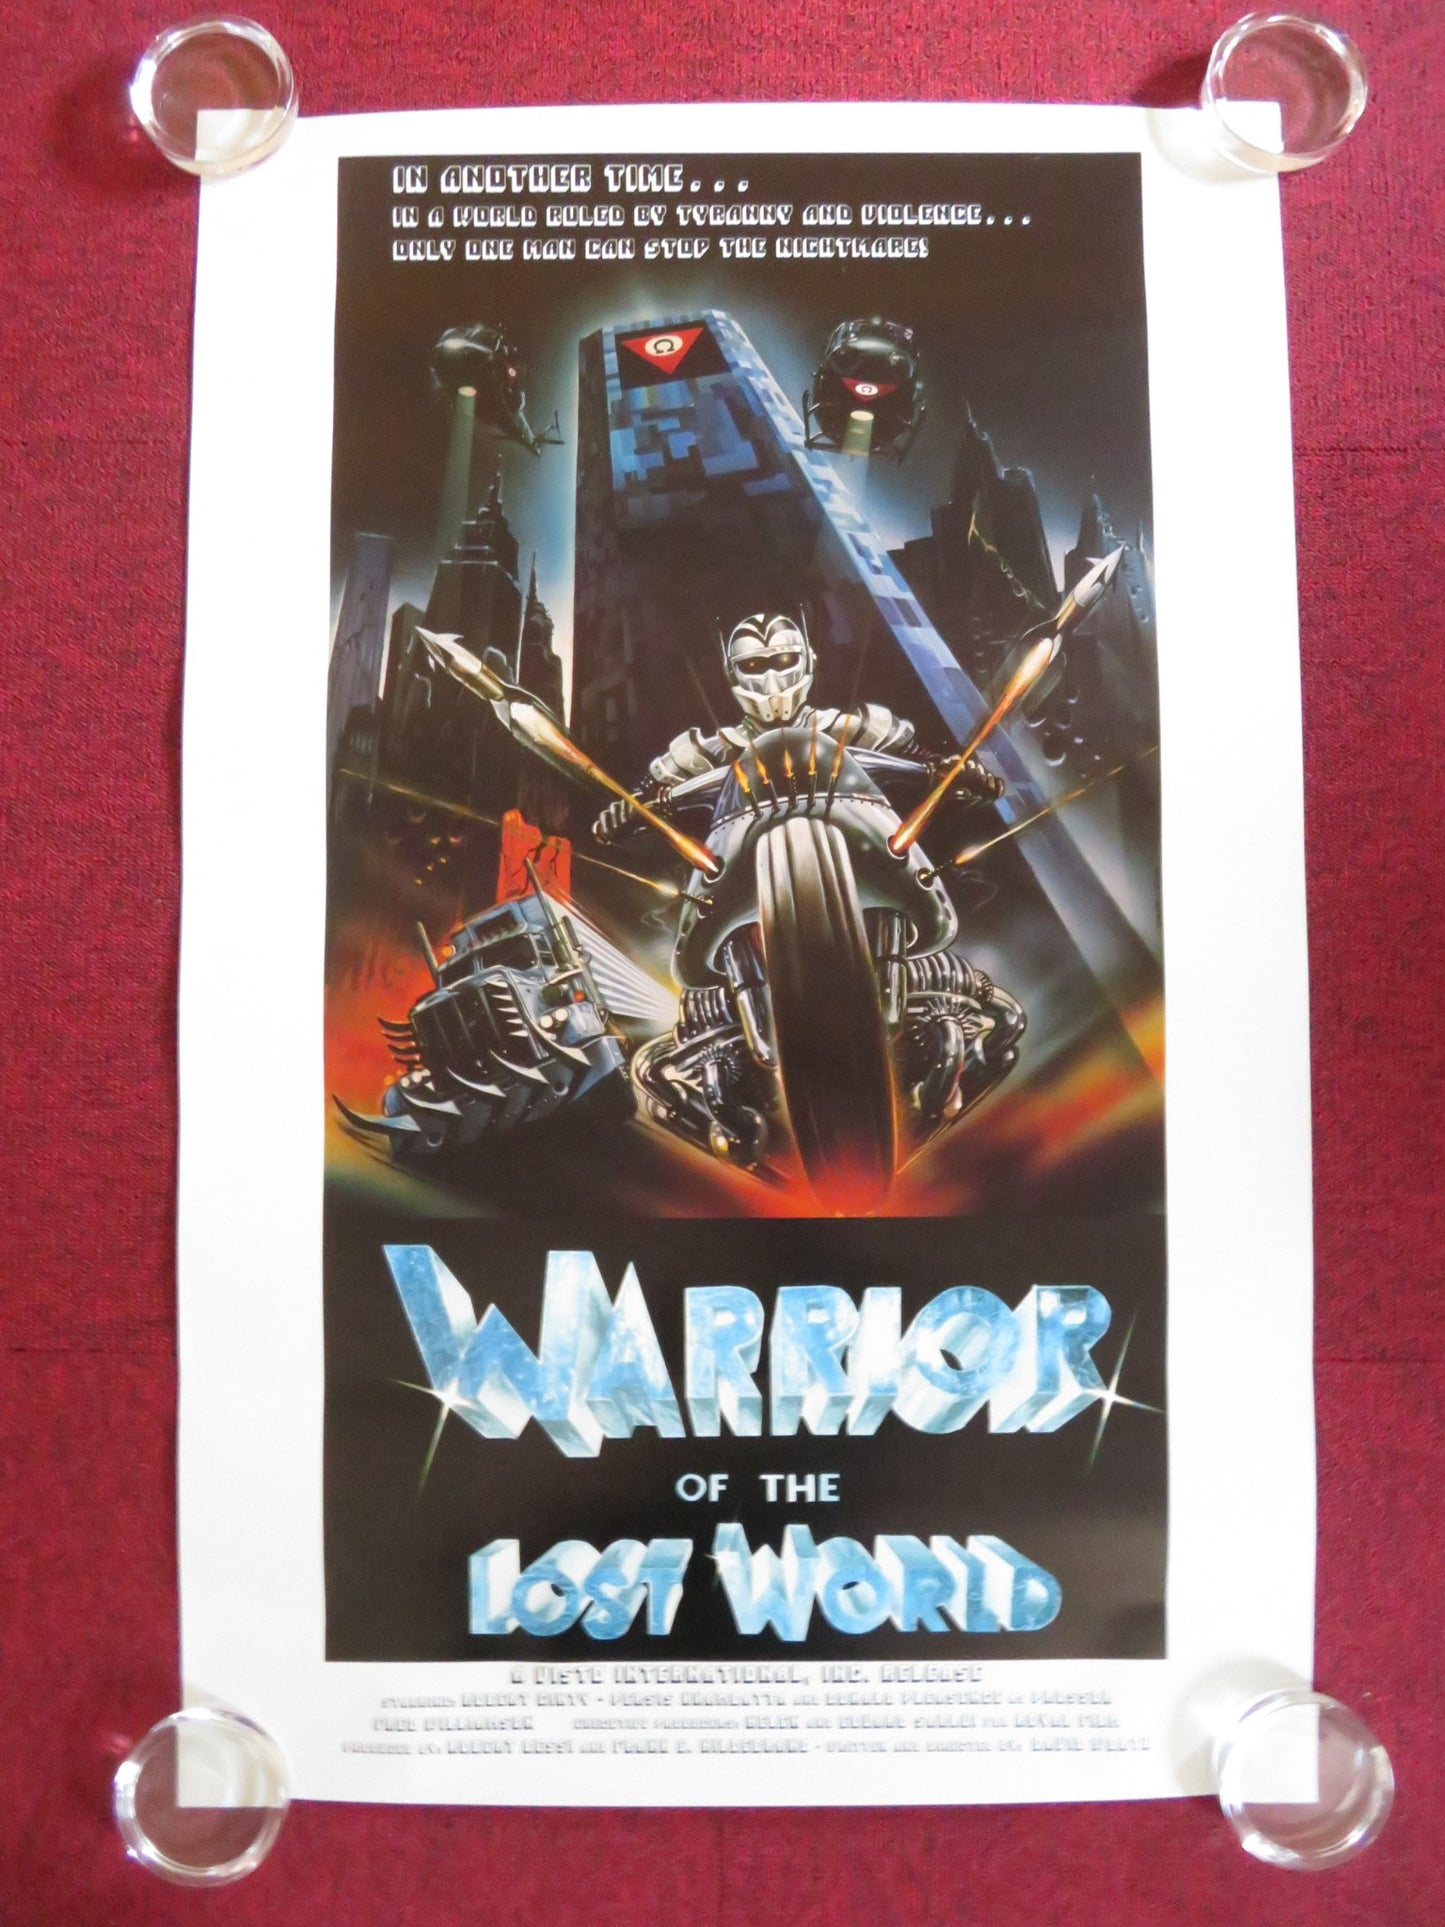 WARRIOR OF THE LOST WORLD ROLLED 37" X 24" POSTER ROBERT GINTY DONALD PLEASENCE